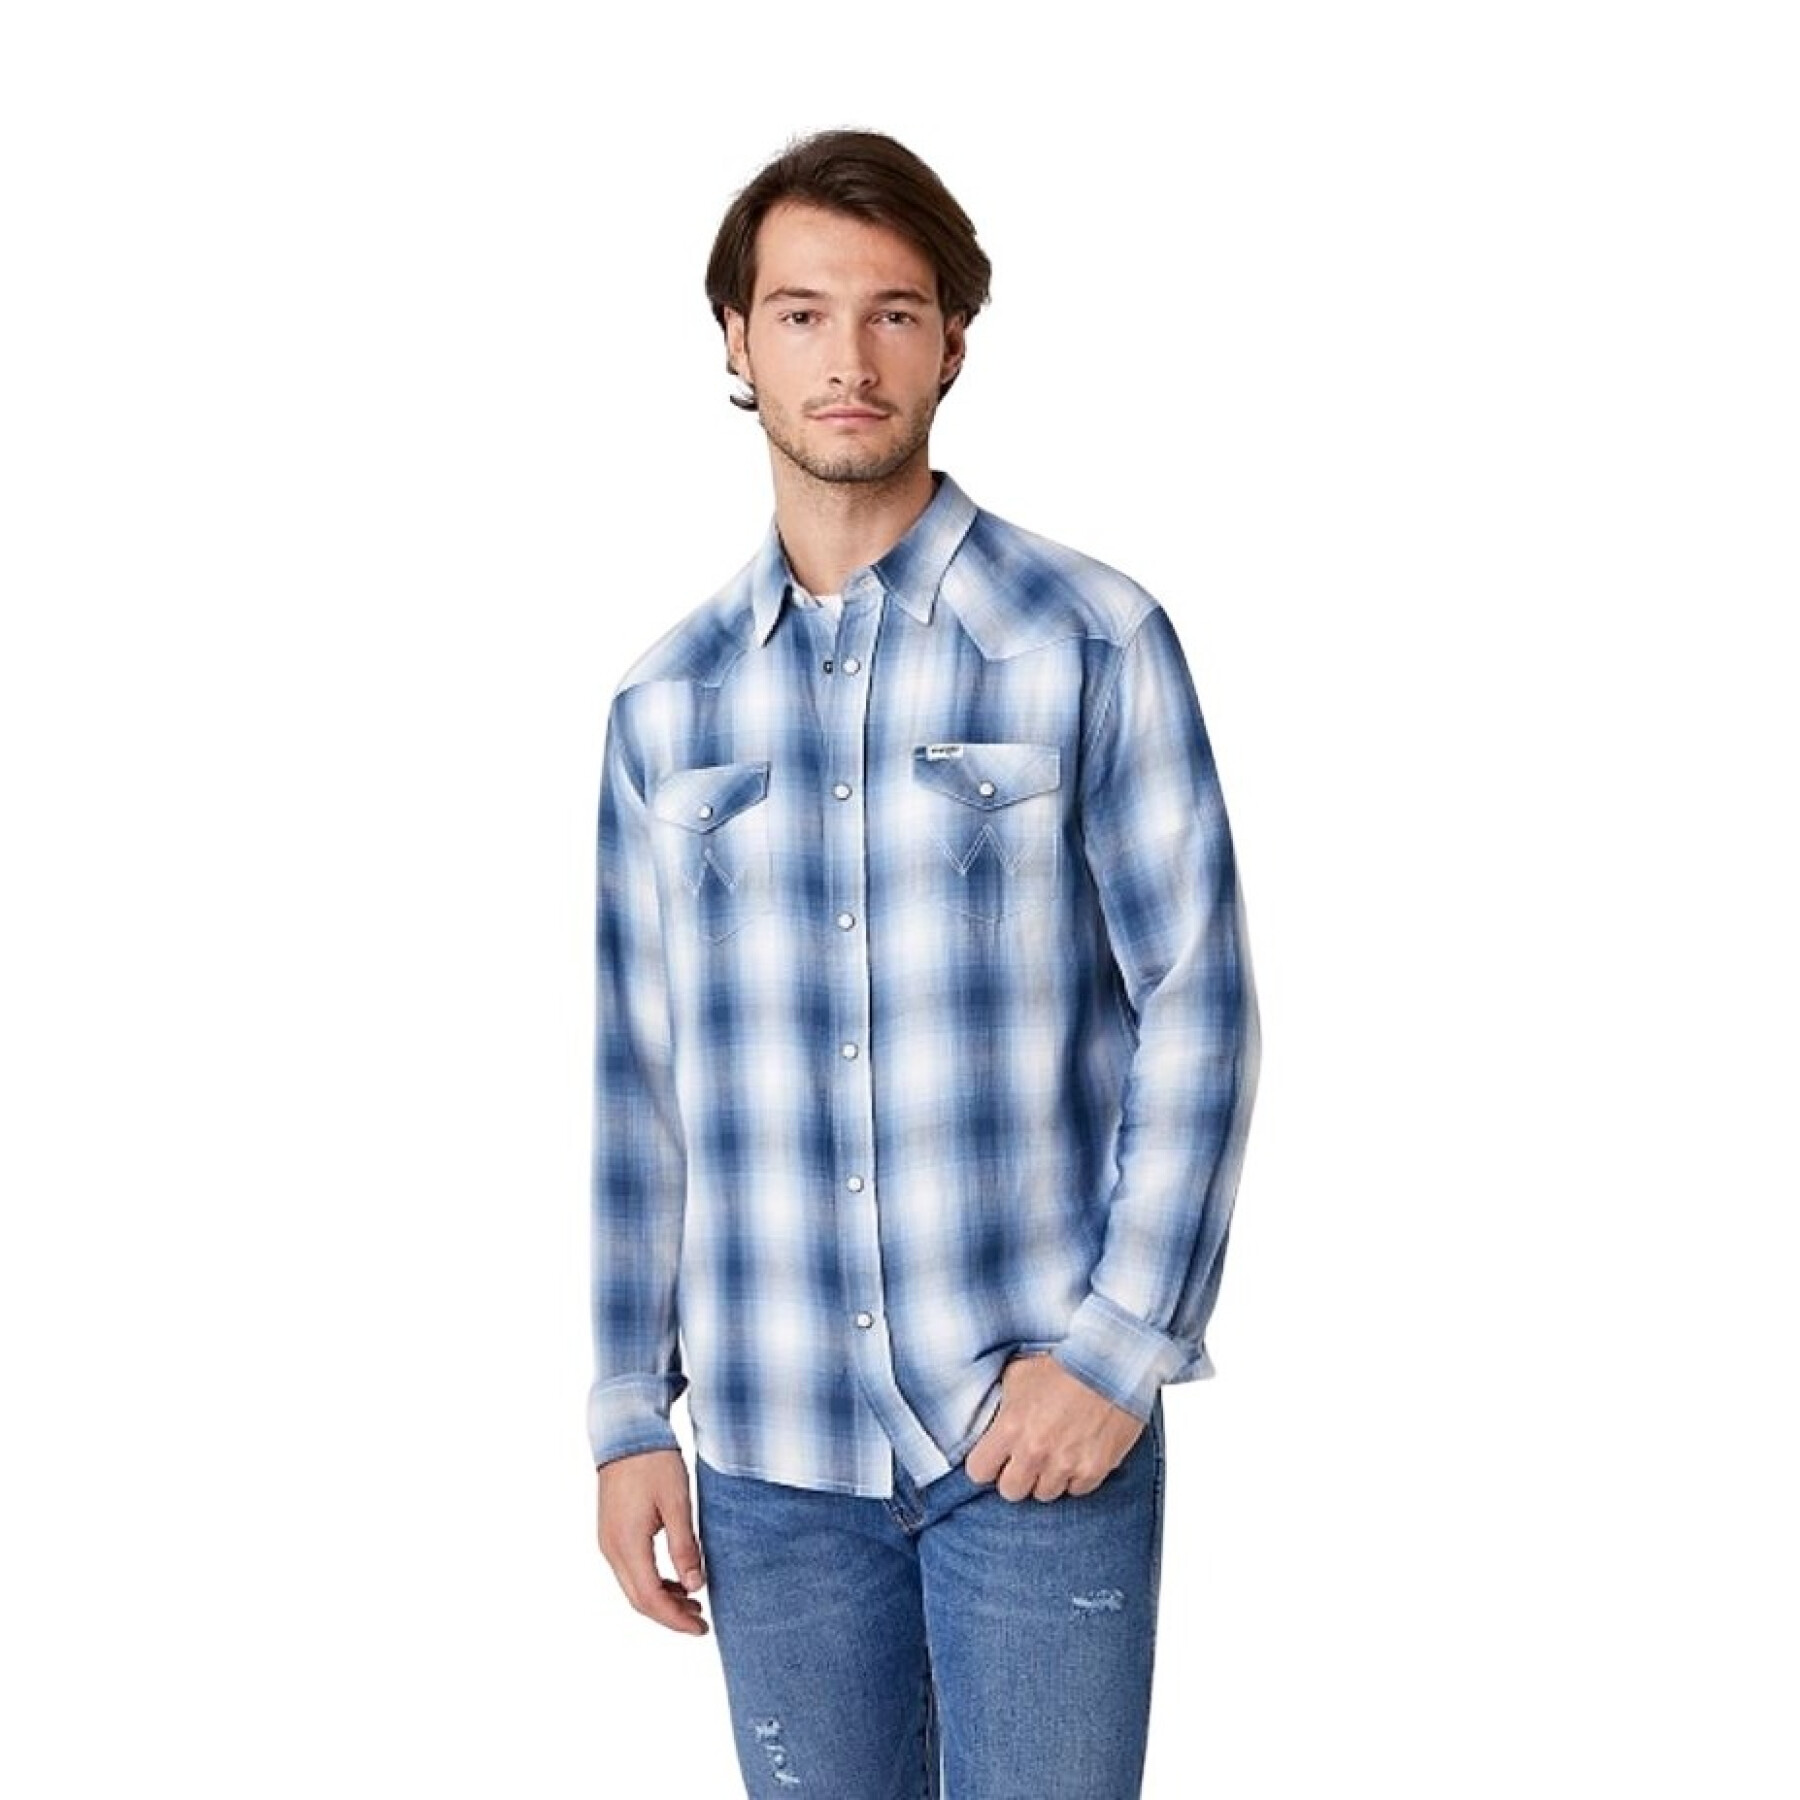 Shirt Wrangler western manches longues